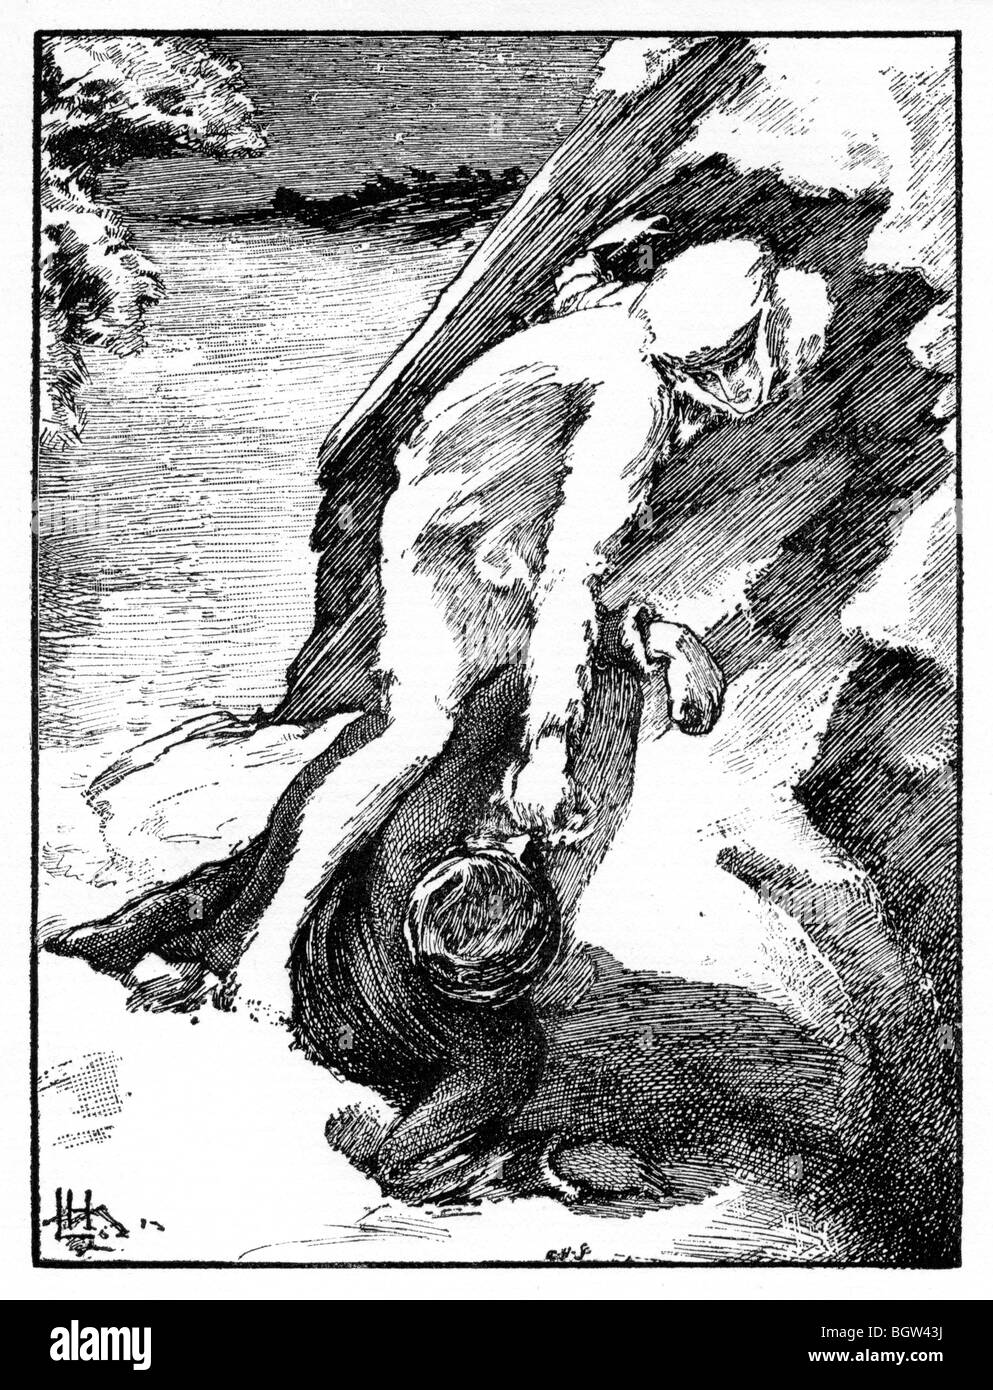 The Were-Wolf, The Finish, illustration from the book by Clemence Housman, drawn by brother Laurence, published in 1896 Stock Photo